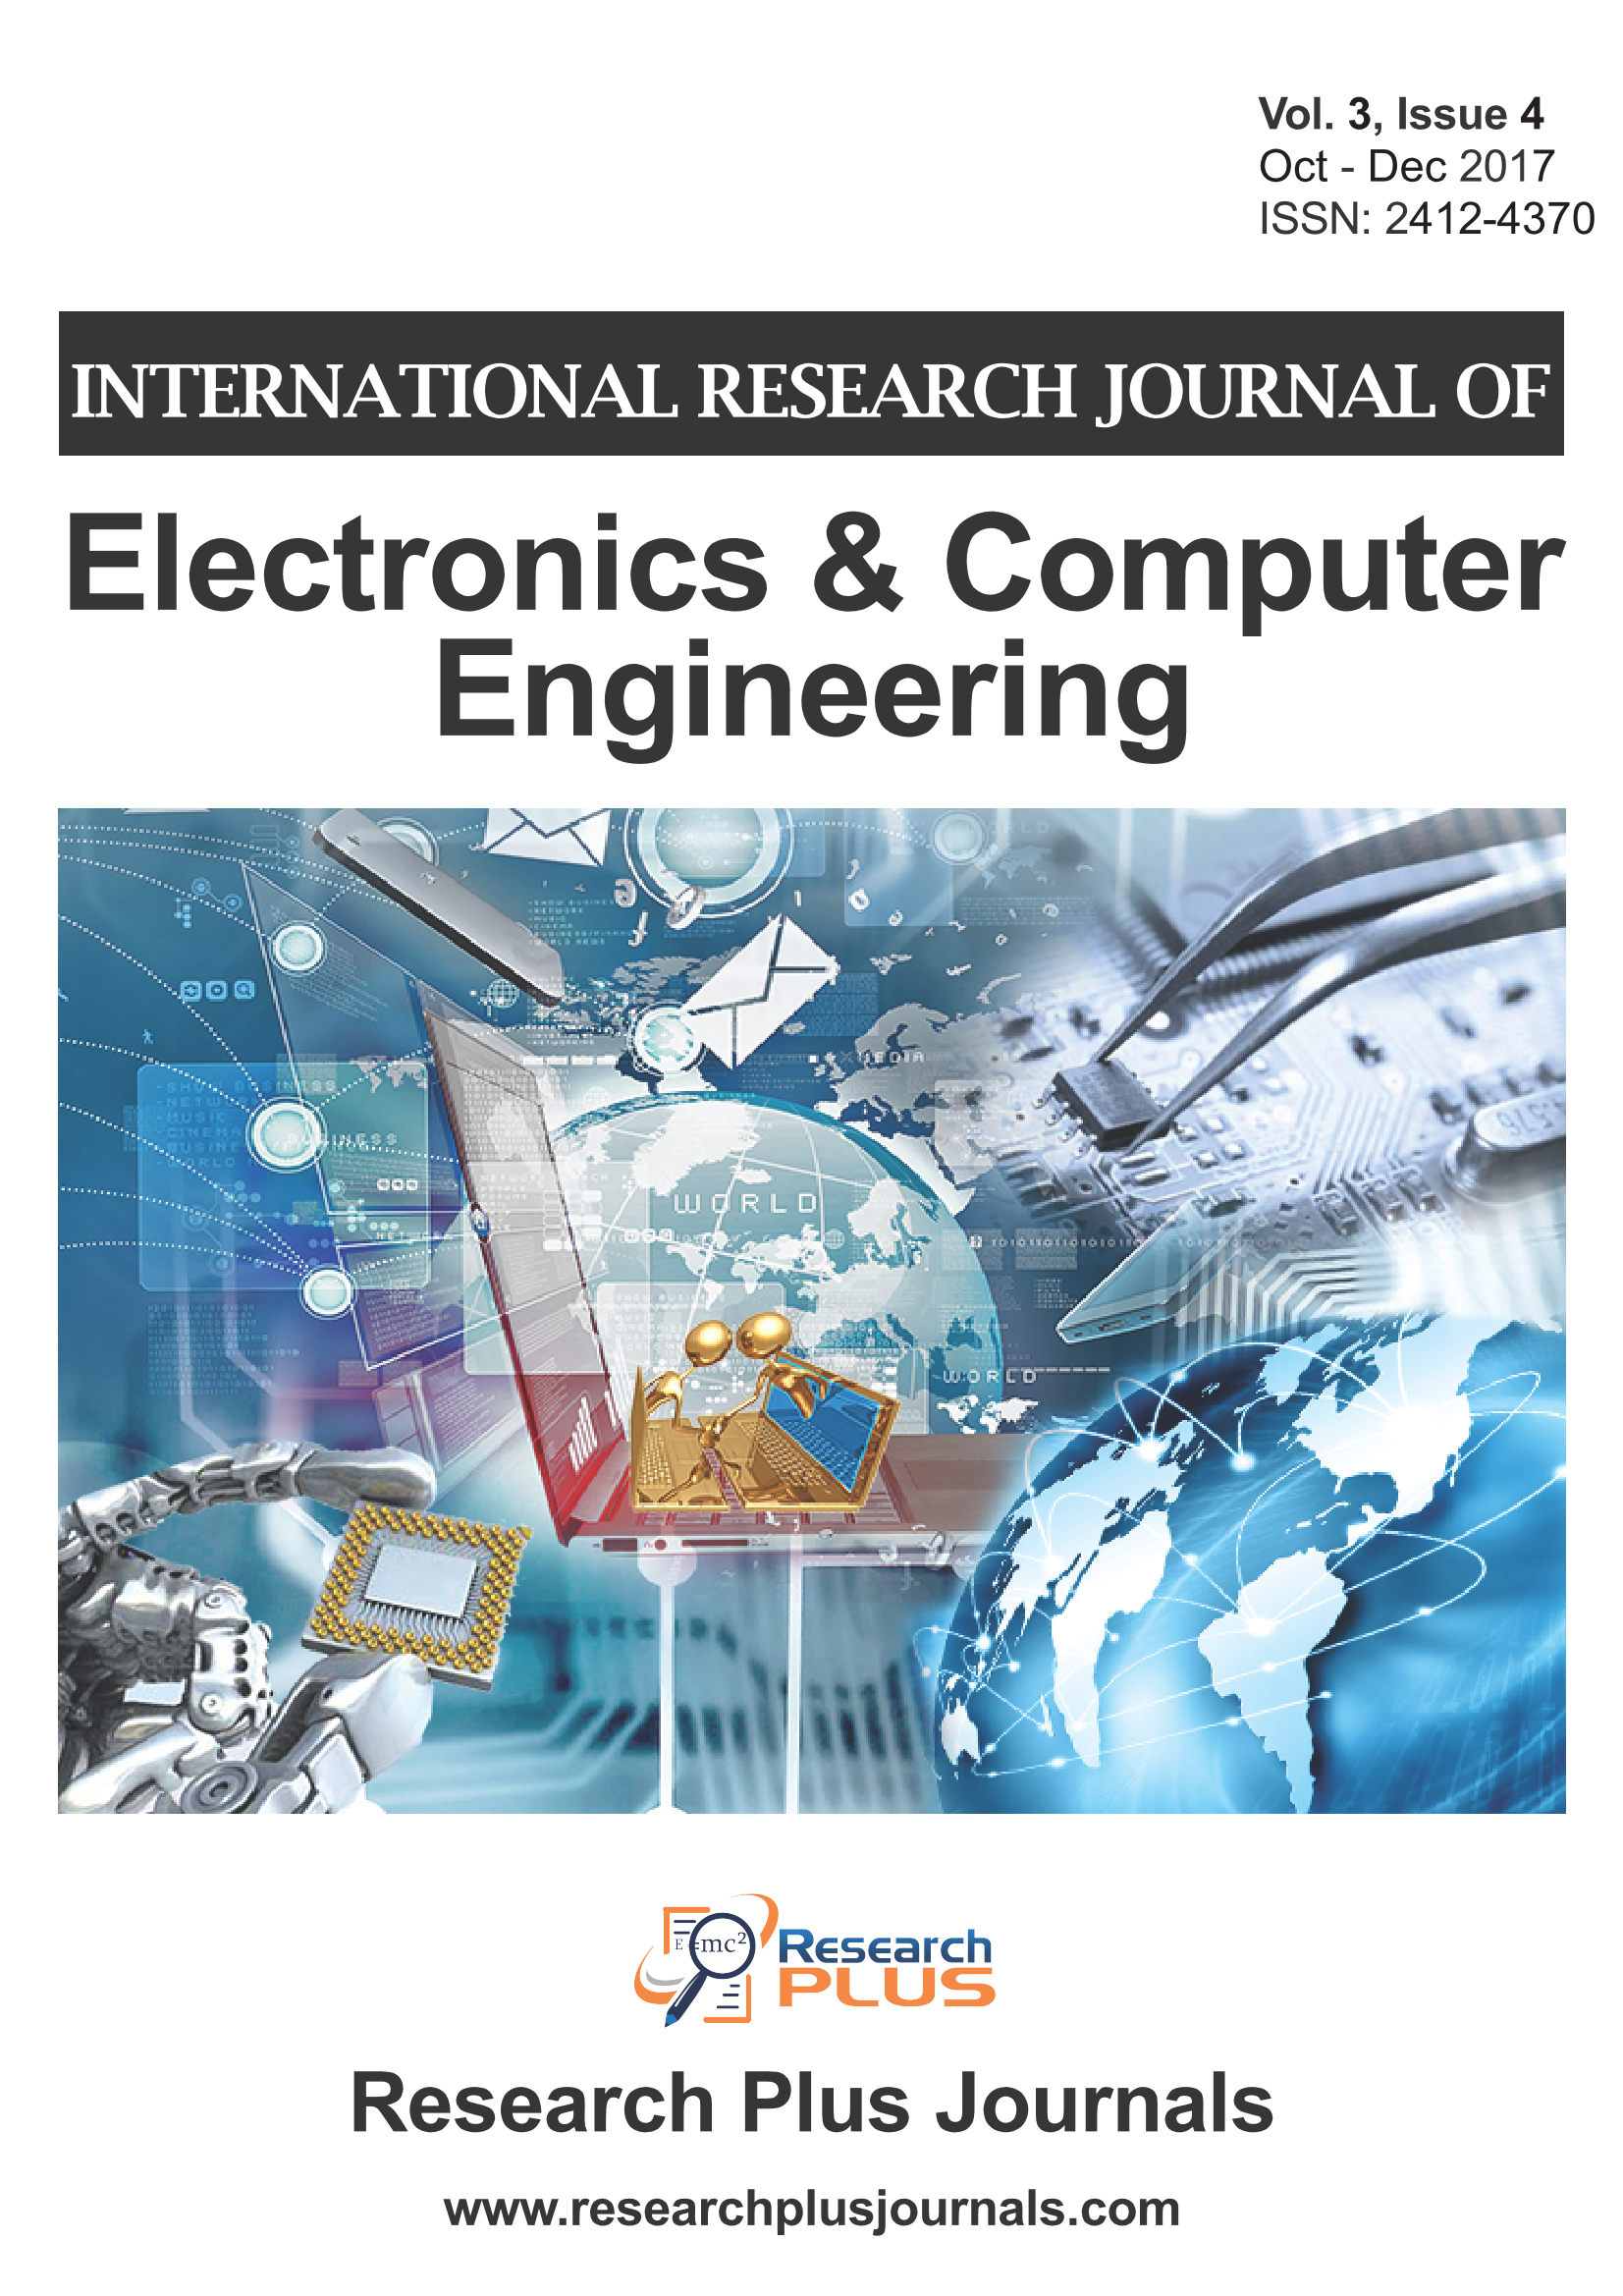 Volume 3, Issue 4, International Research Journal of Electronics & Computer Engineering (IRJECE) (Online ISSN : 2412-4370)